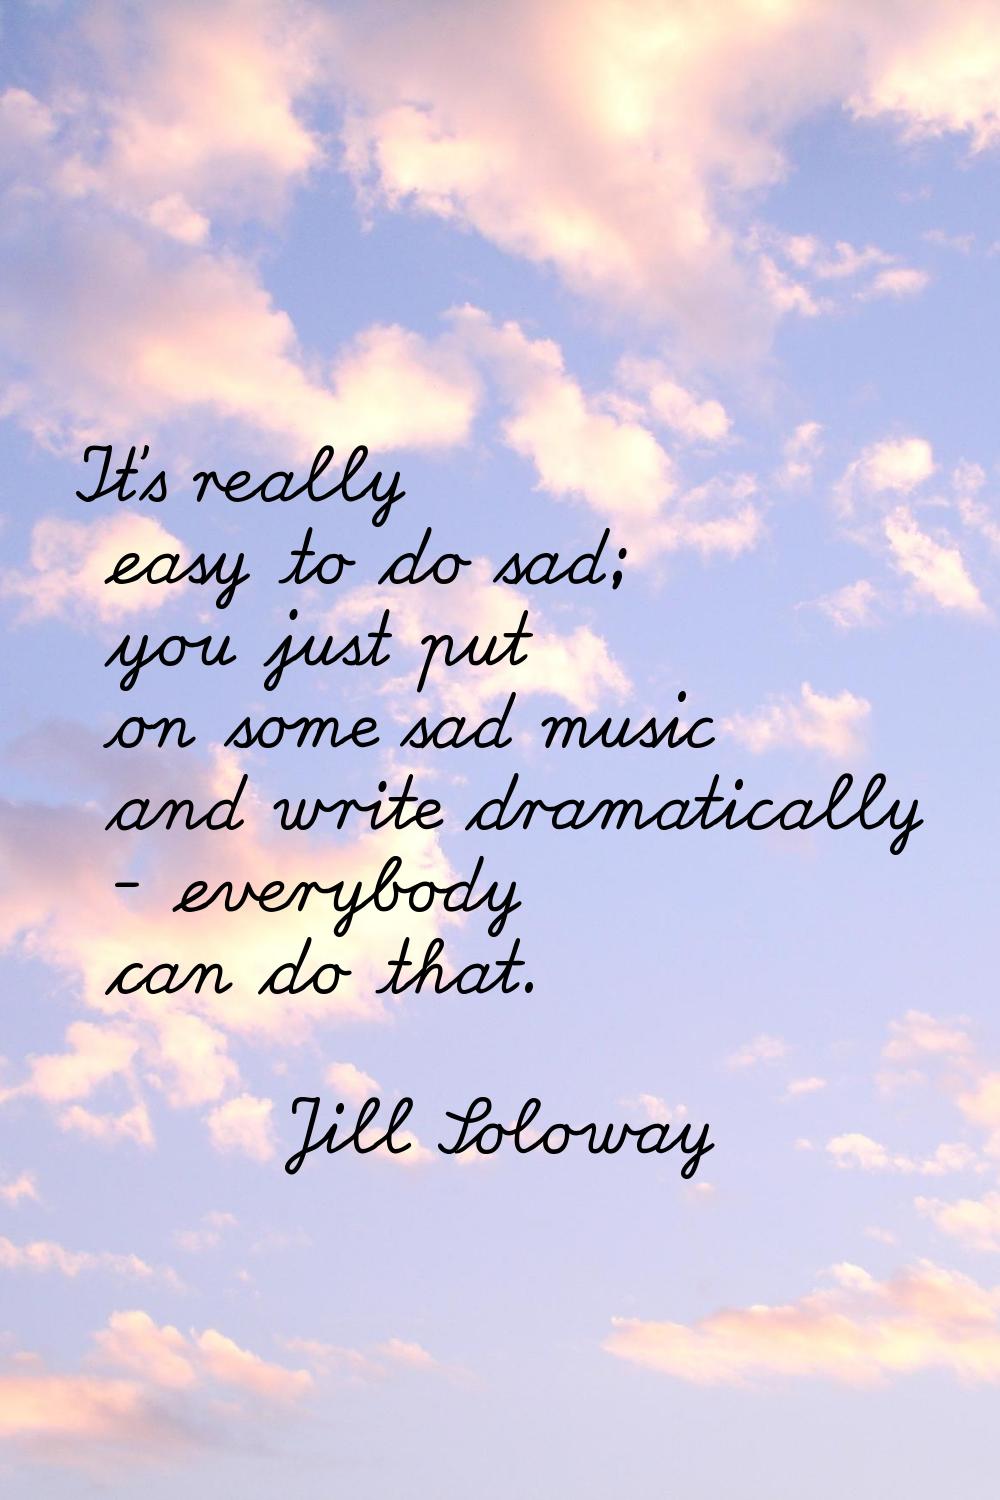 It's really easy to do sad; you just put on some sad music and write dramatically - everybody can d